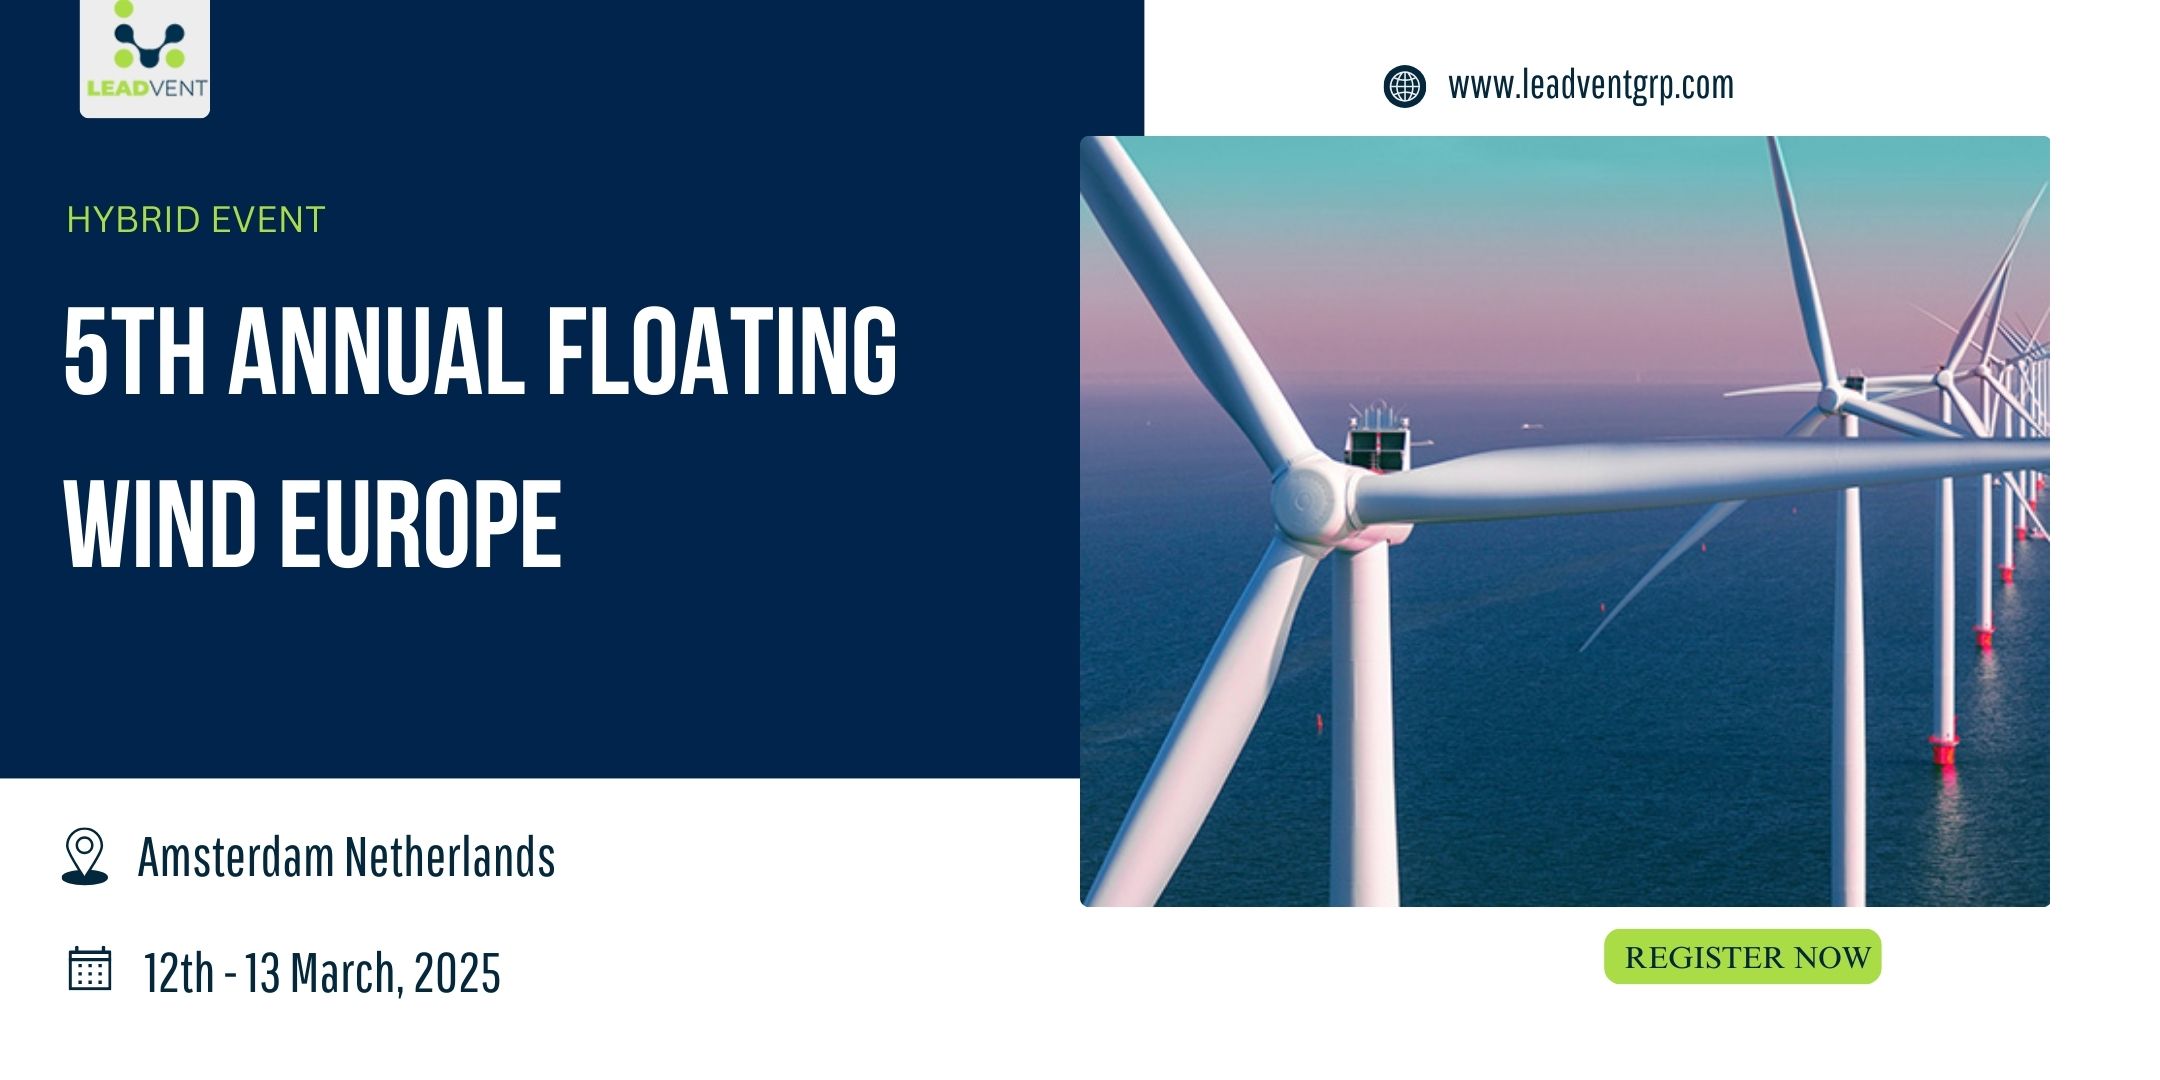 5th Annual Floating Wind Europe organized by Leadvent Group